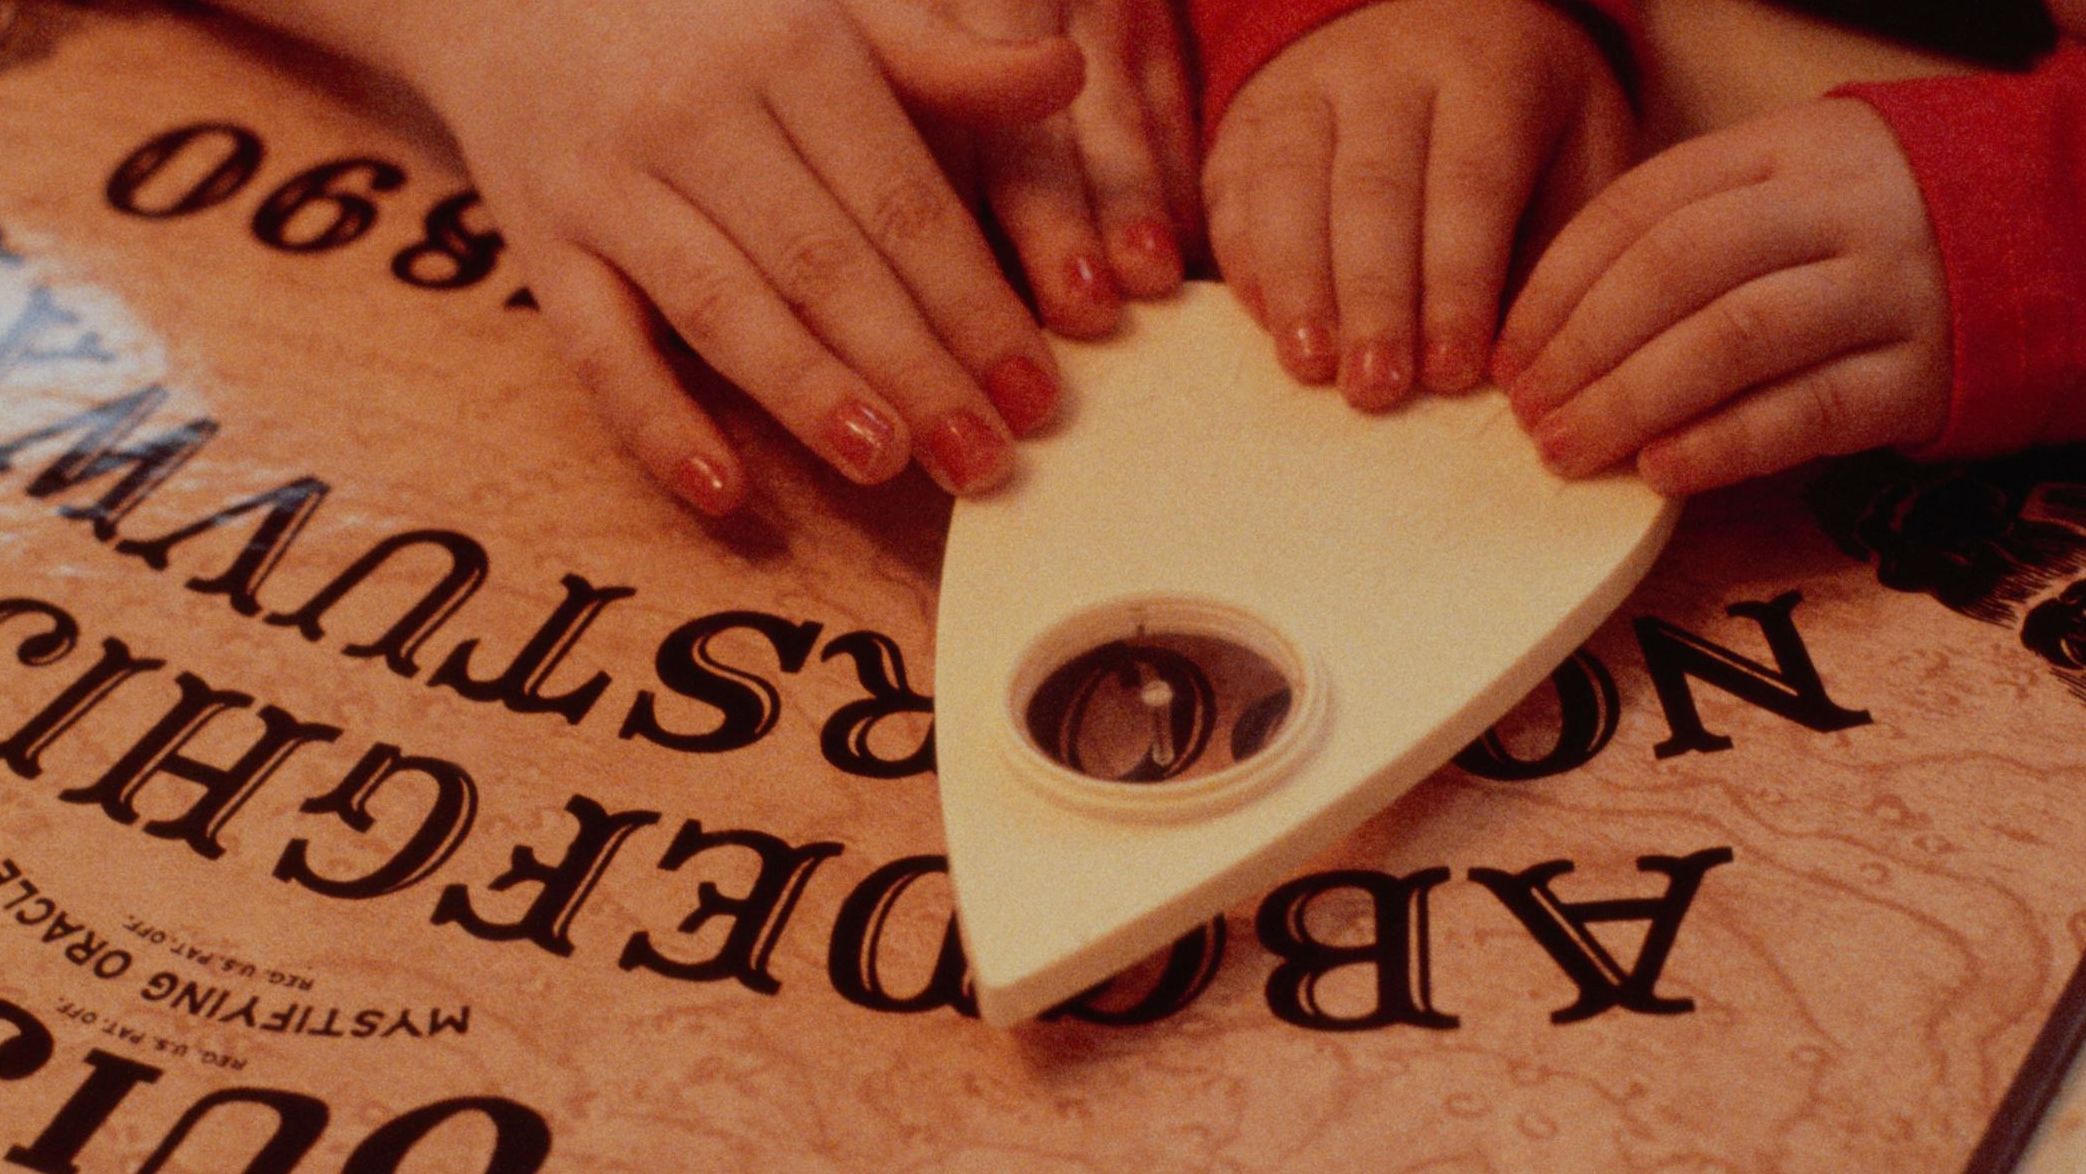 Jason Hawes: If you use a Ouija board to summon a spirit, "you're opening yourself up to a world of trouble."